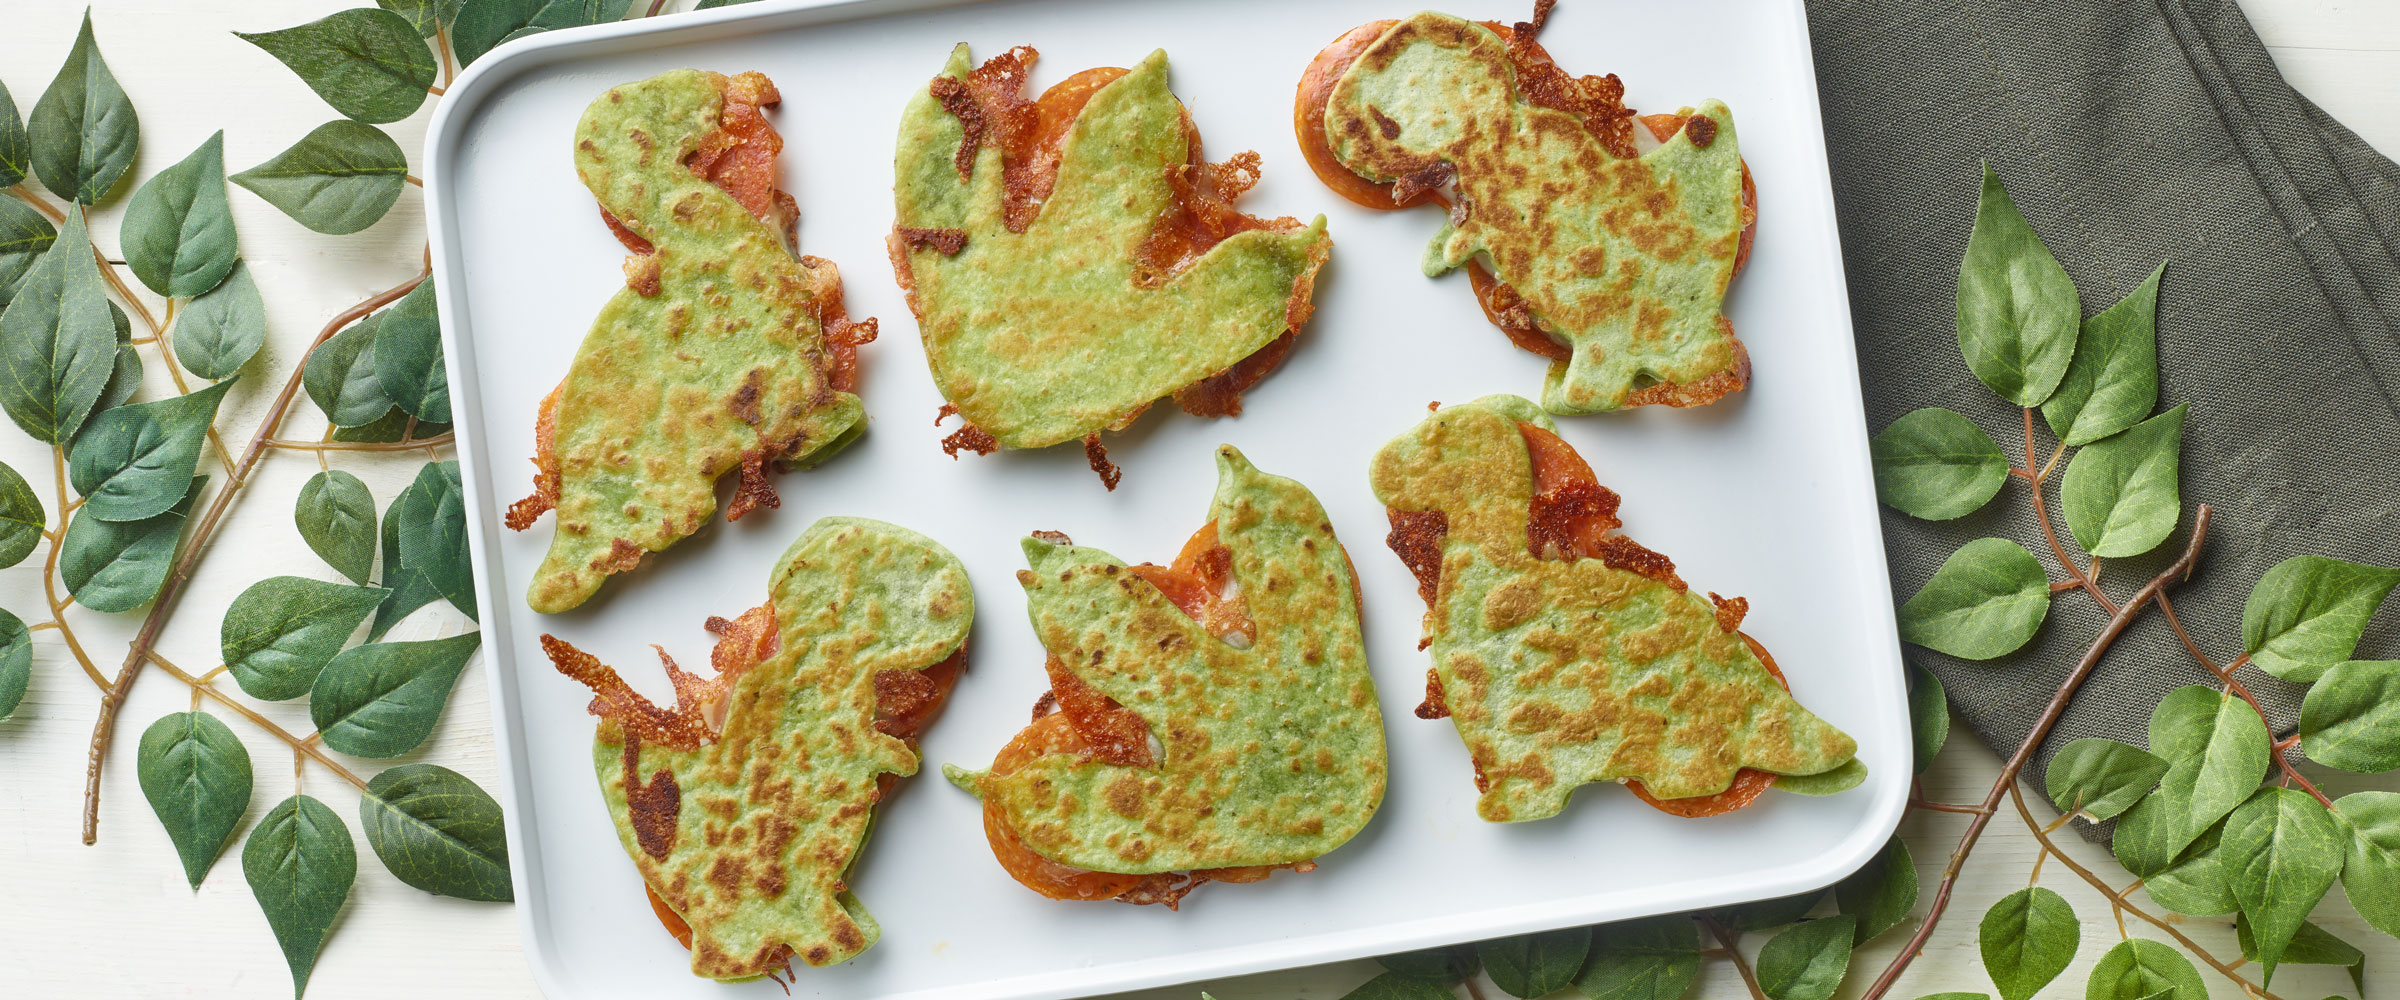 Pepperoni Dino Quesadillas on white plate with decorative greens